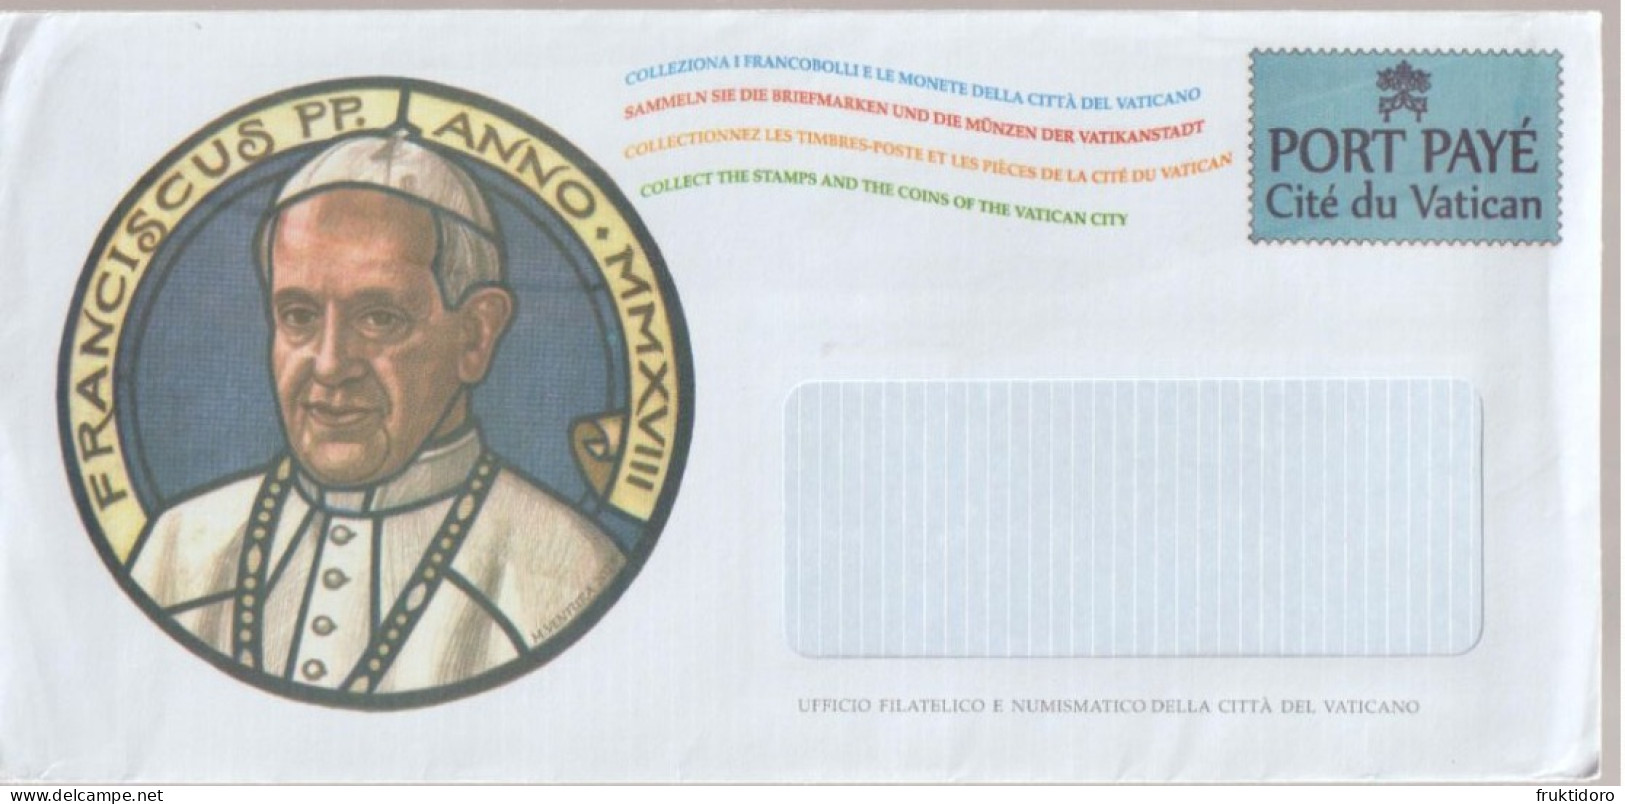 Vatican City - Port Payé - Envelopes With Drawings About Pope Francis I - St Peter's Basilica - Storia Postale